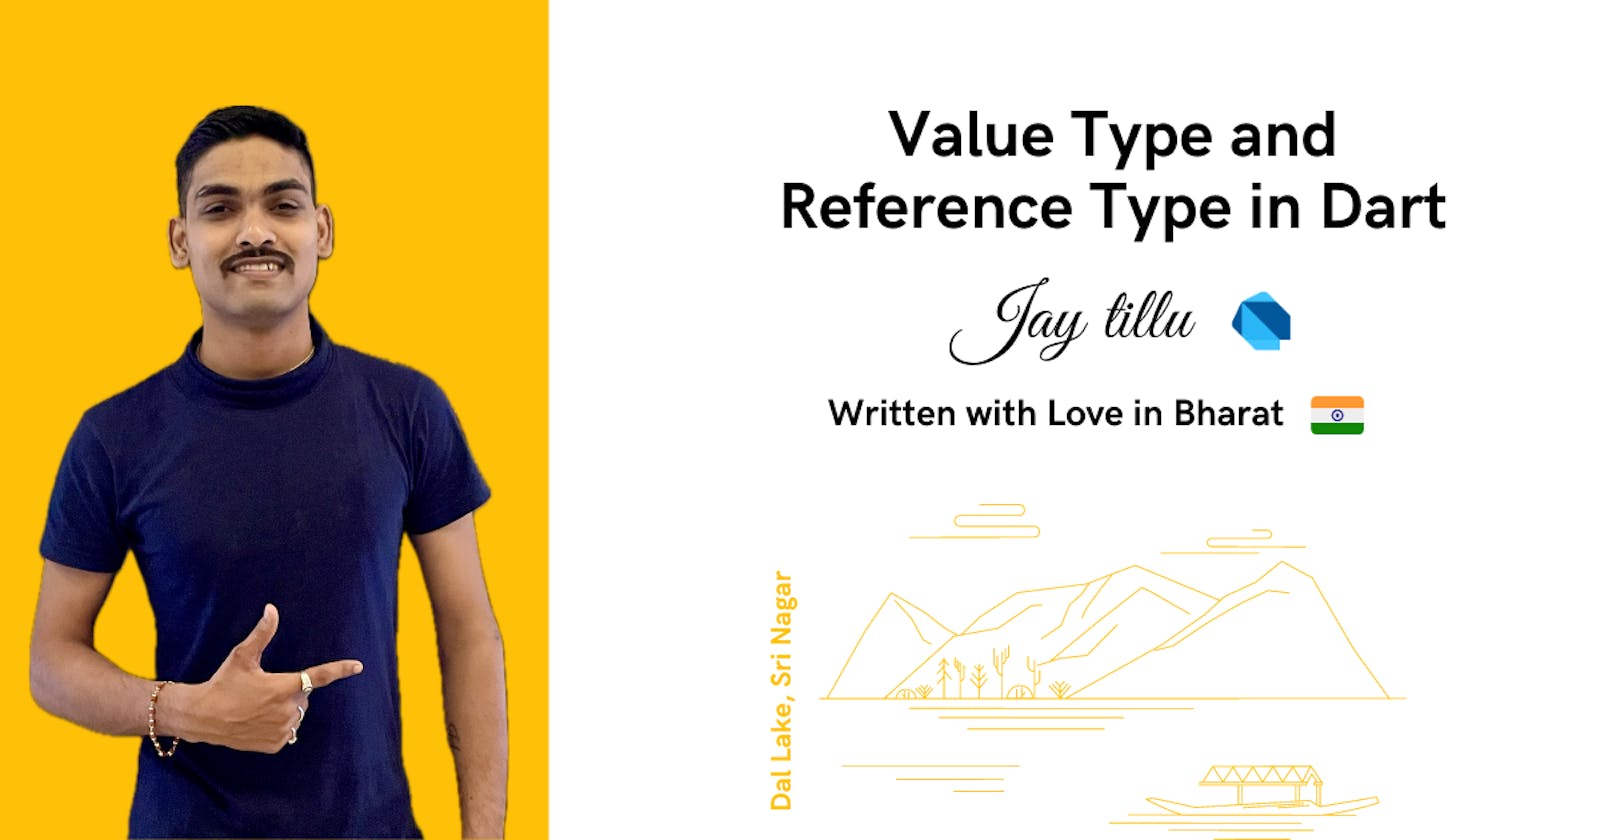 Value Type and Reference Type in Dart